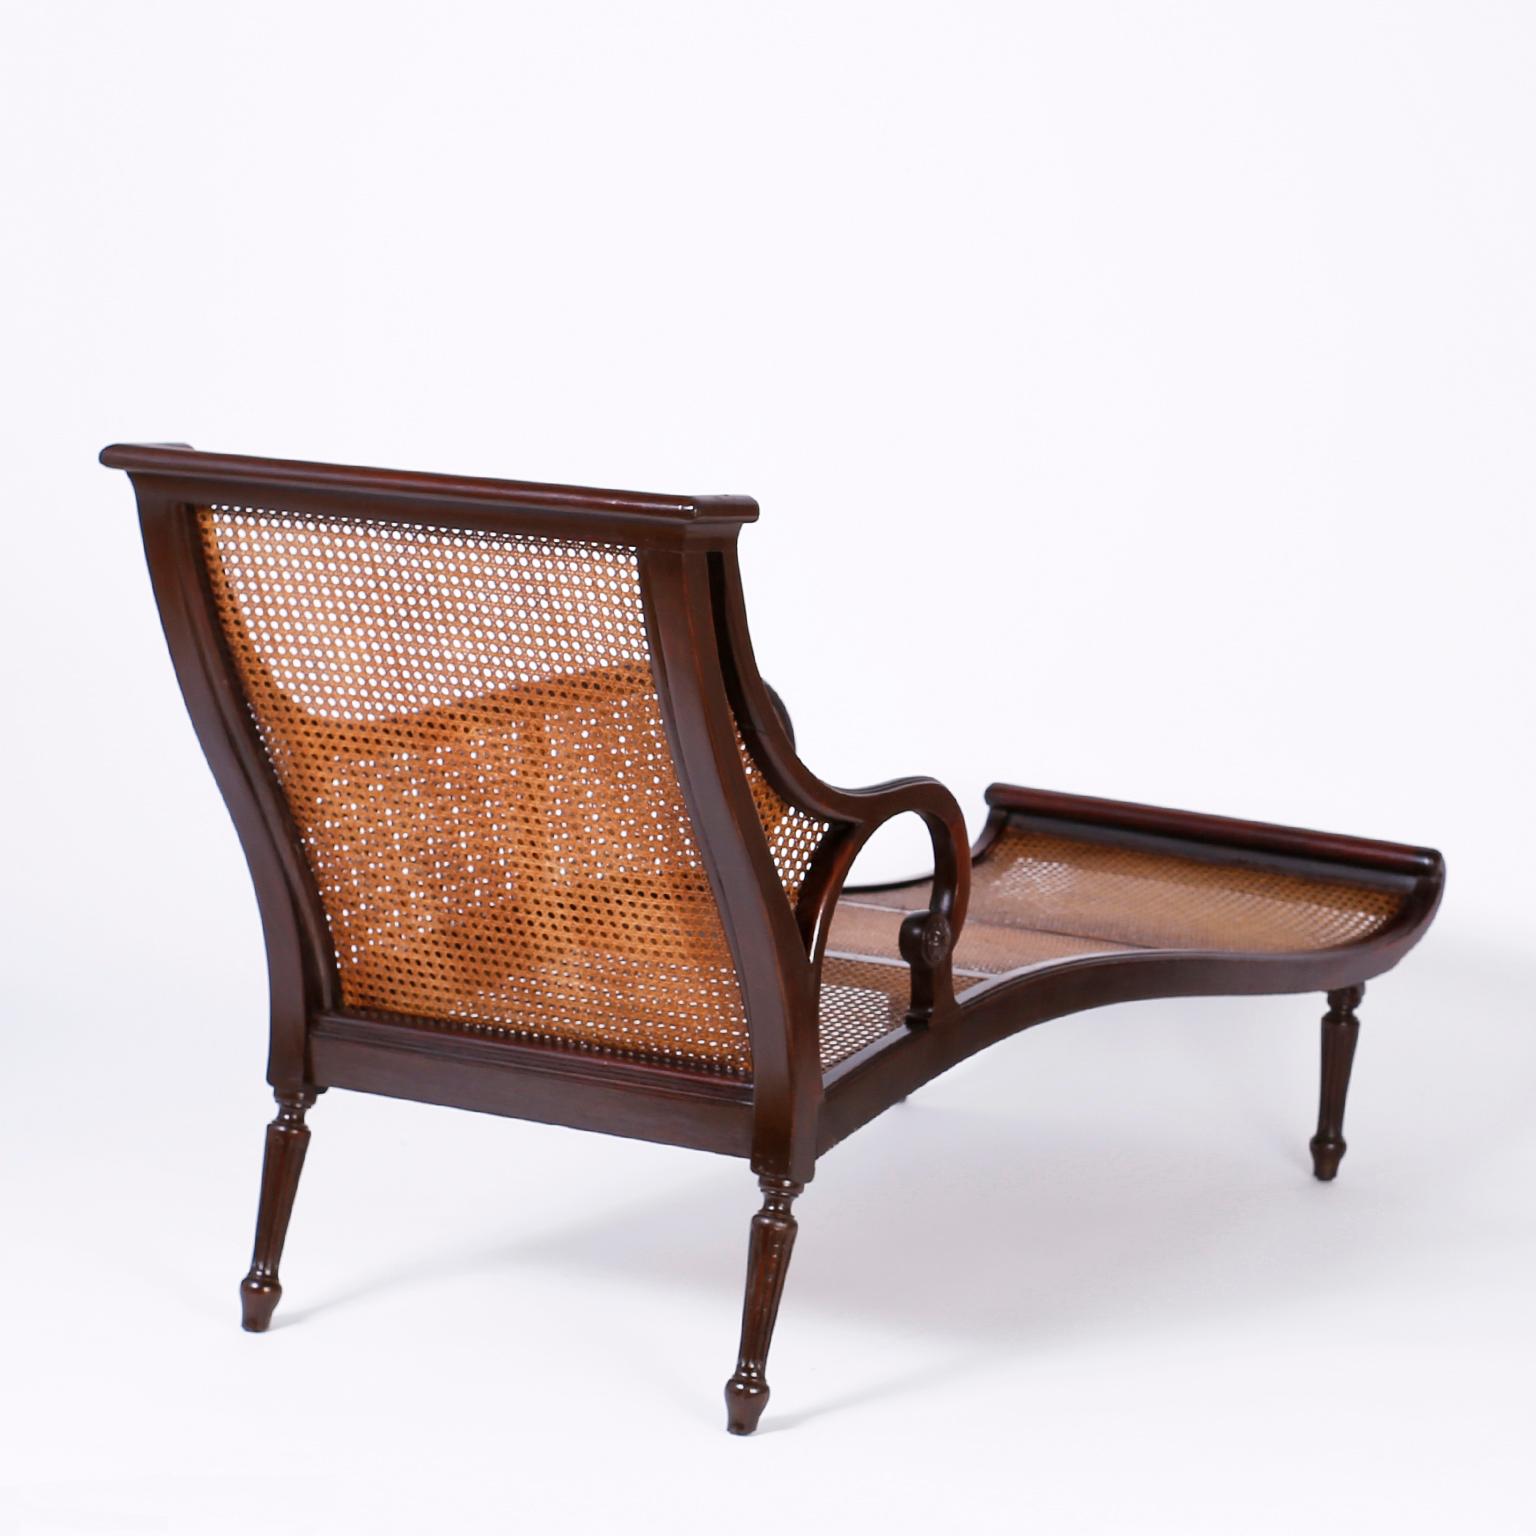 Mahogany British Colonial Caned Chaise Lounge or Recamier